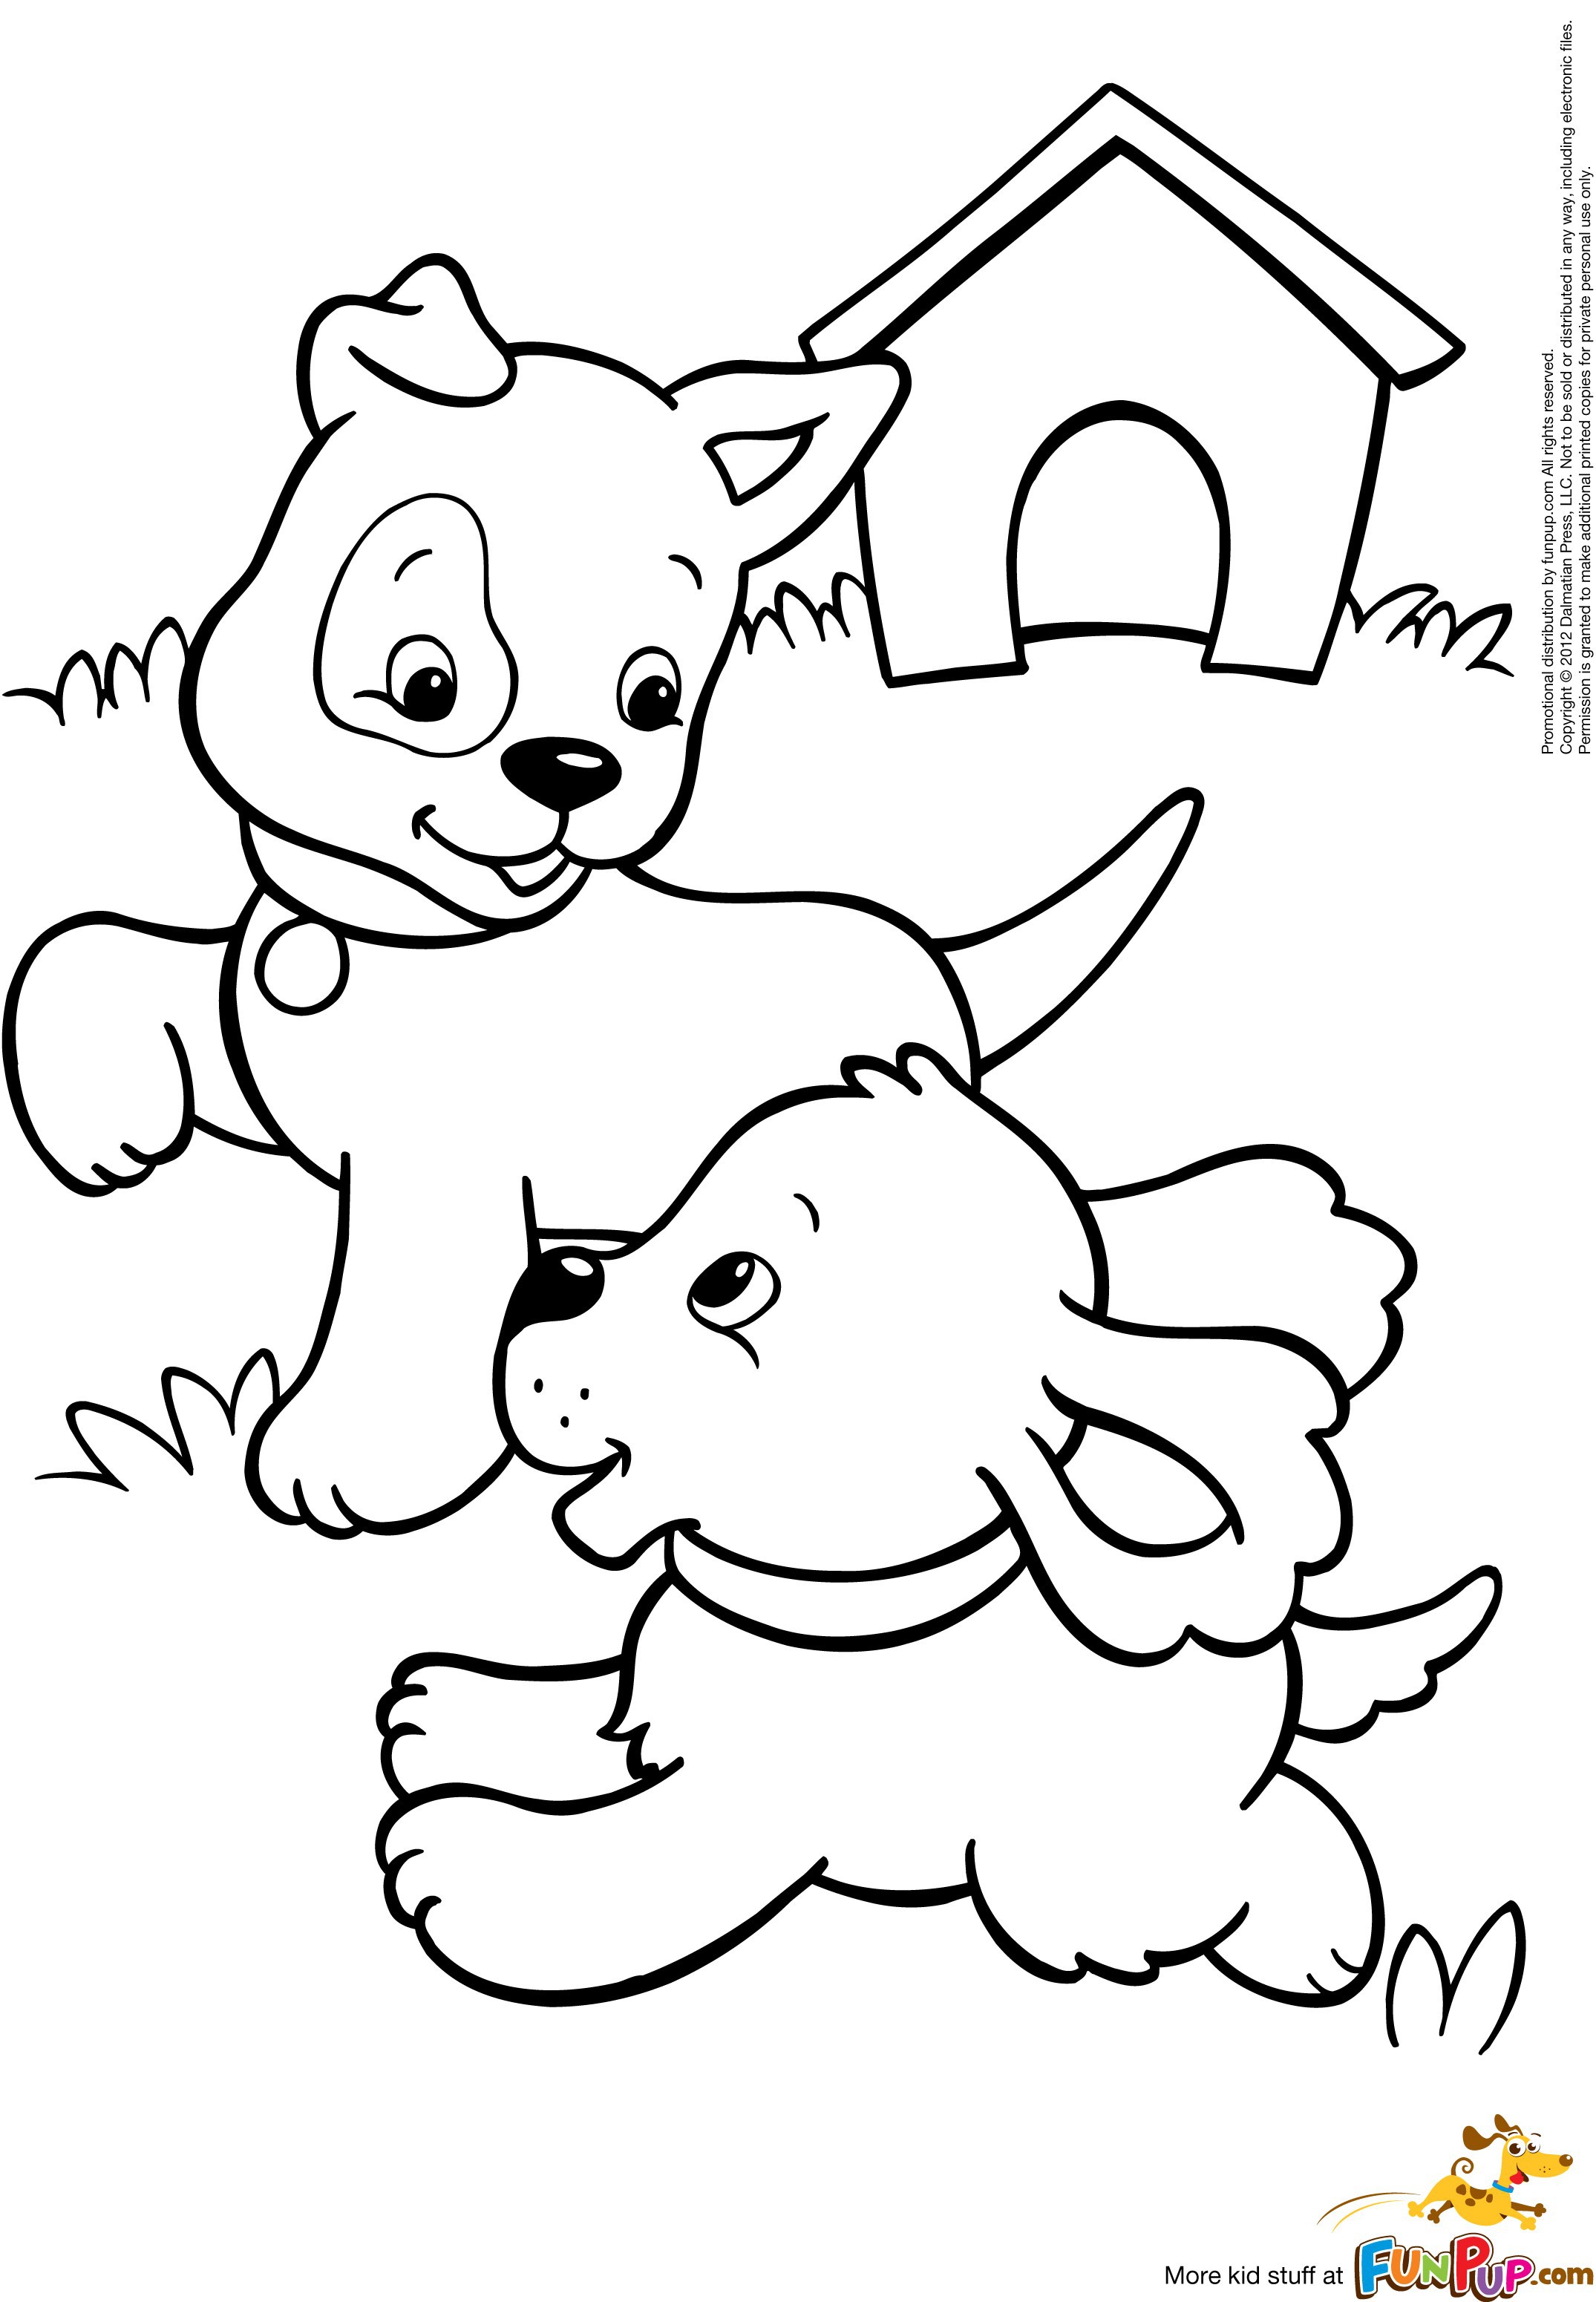 Simplistic Coloring Pages Puppies Astonishing At Cute Puppy With HD